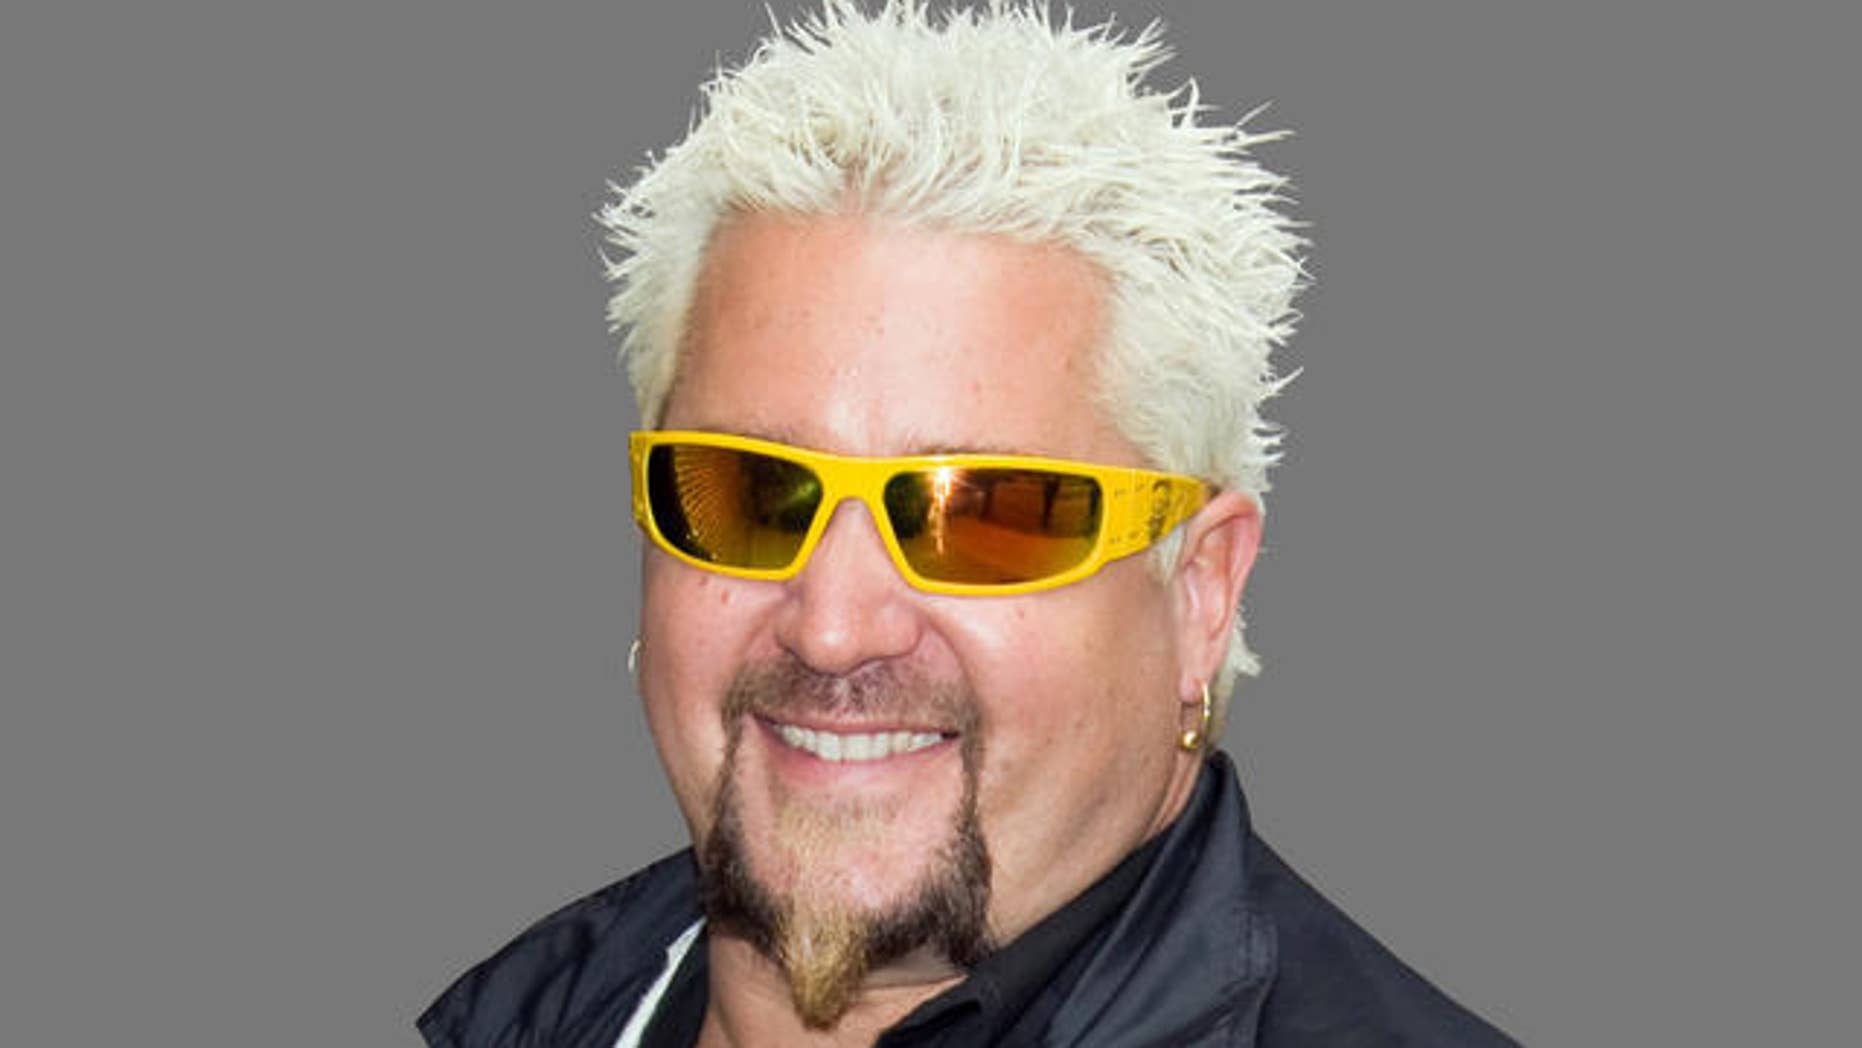 The New York Times writes brutal review of Guy Fieri's new restaurant